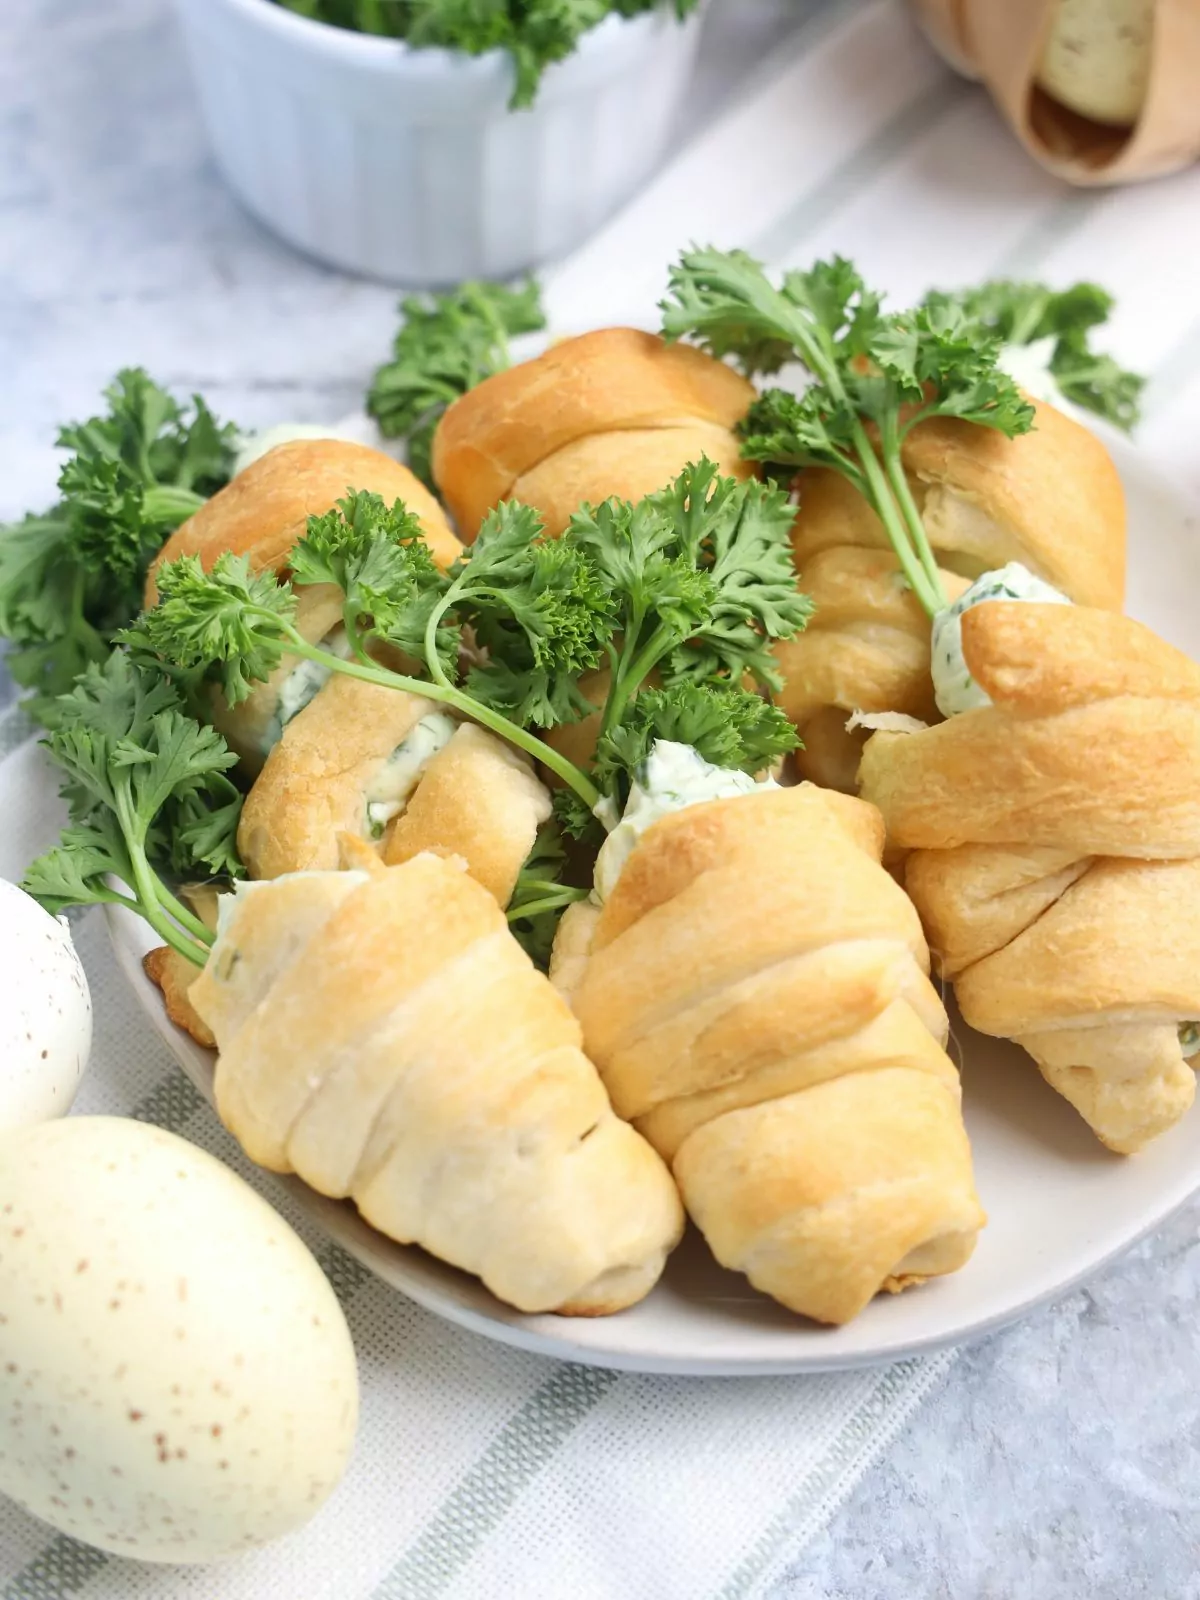 spinach dip inside baked crescent rolls shaped like carrots on plate.